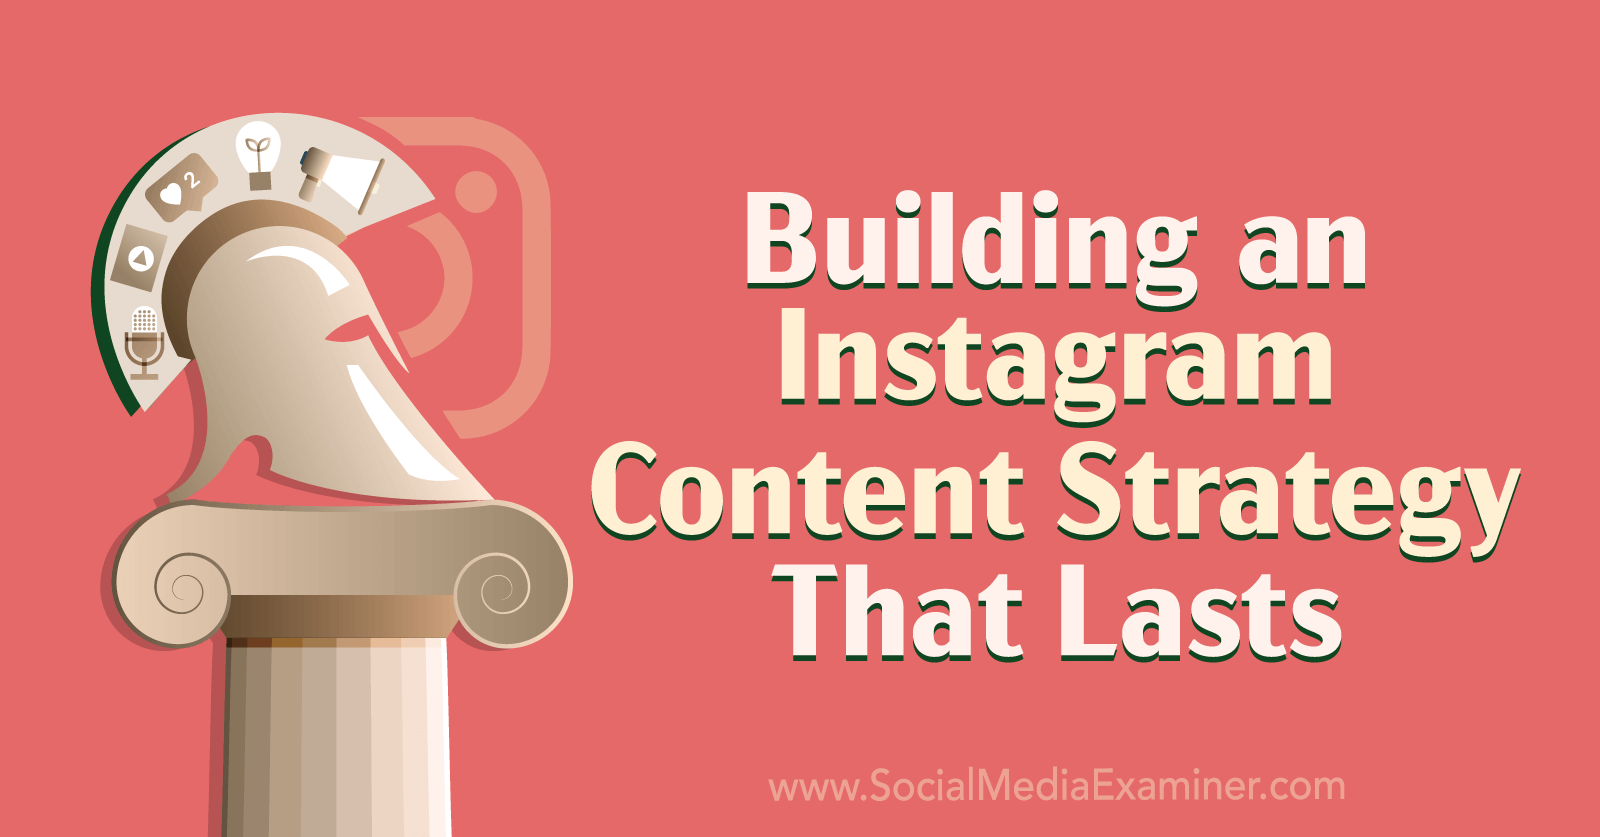 Building an Instagram Content Strategy That Lasts featuring insights from Katie Steckly on the Social Media Marketing Podcast.